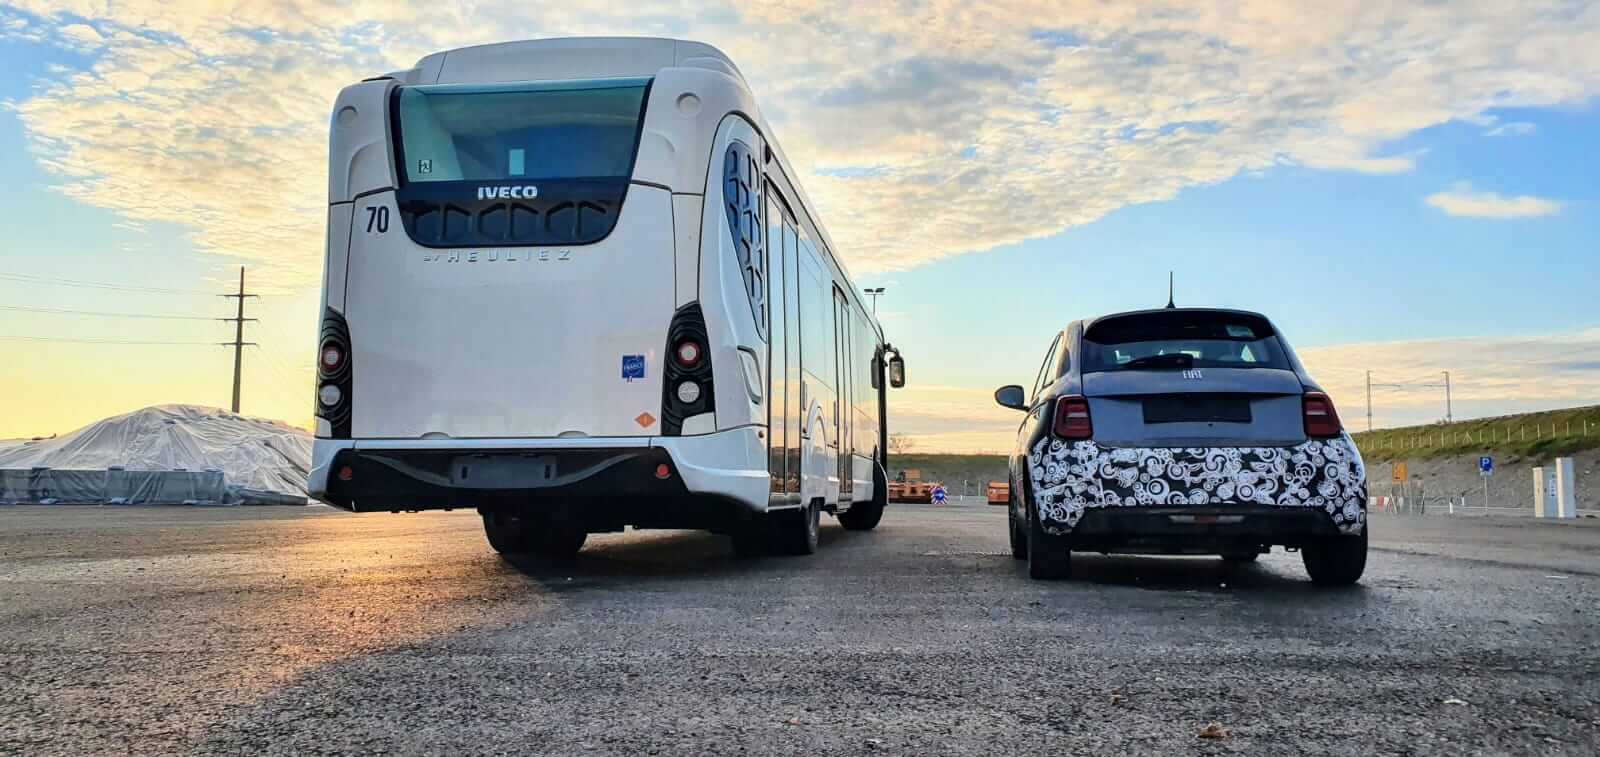 Arena of the future - Electreon powers Fiat 500 (Stellantis) and Iveco bus